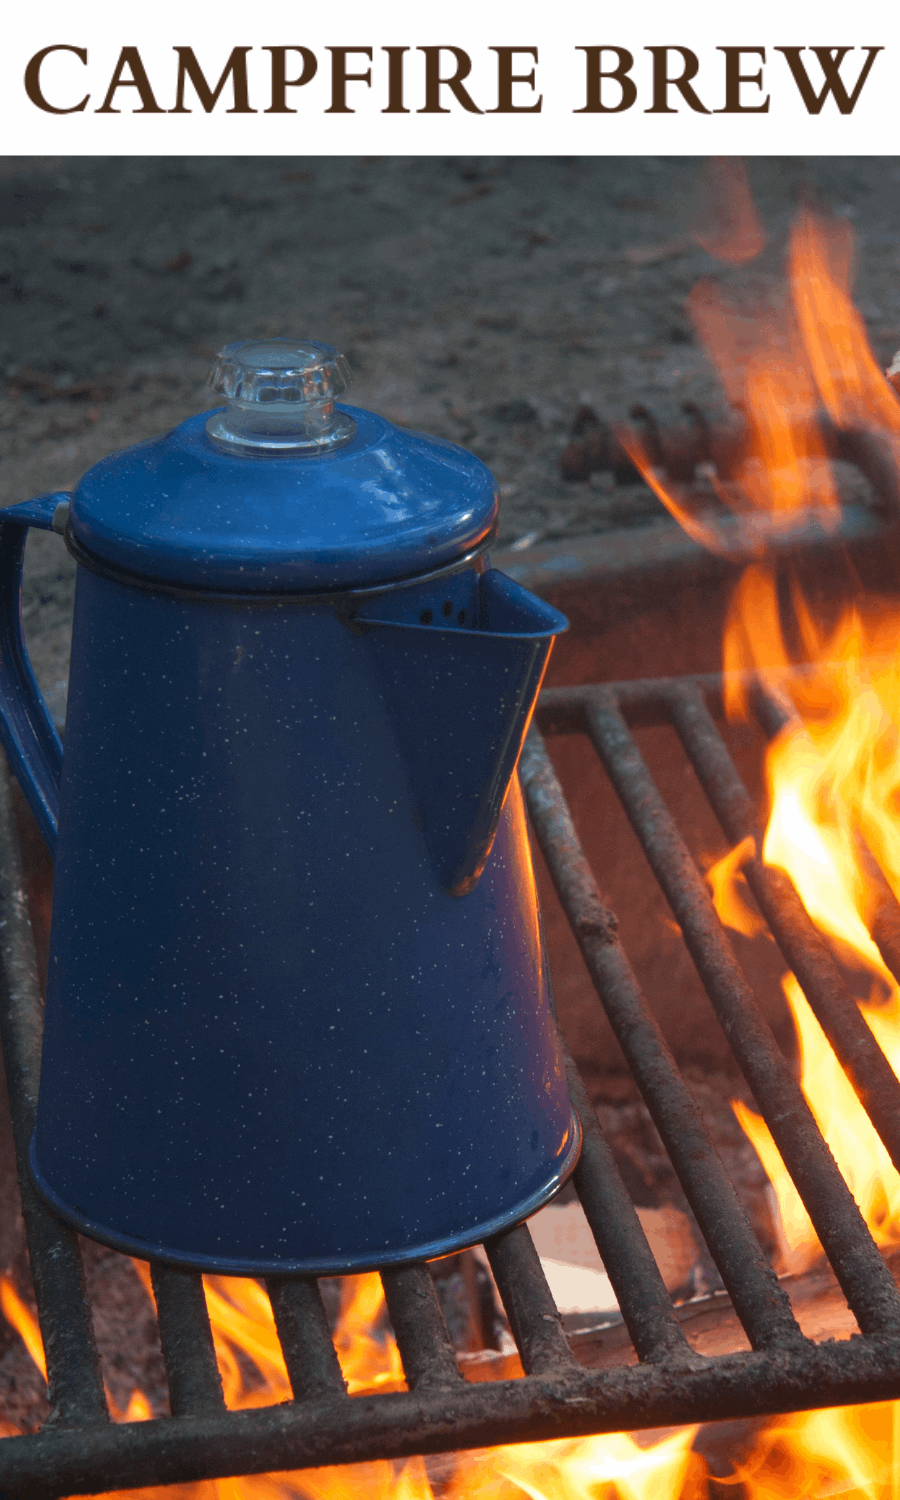 Picture of an old cobalt blue percolator coffee pot on top of a grate over an open campfire.